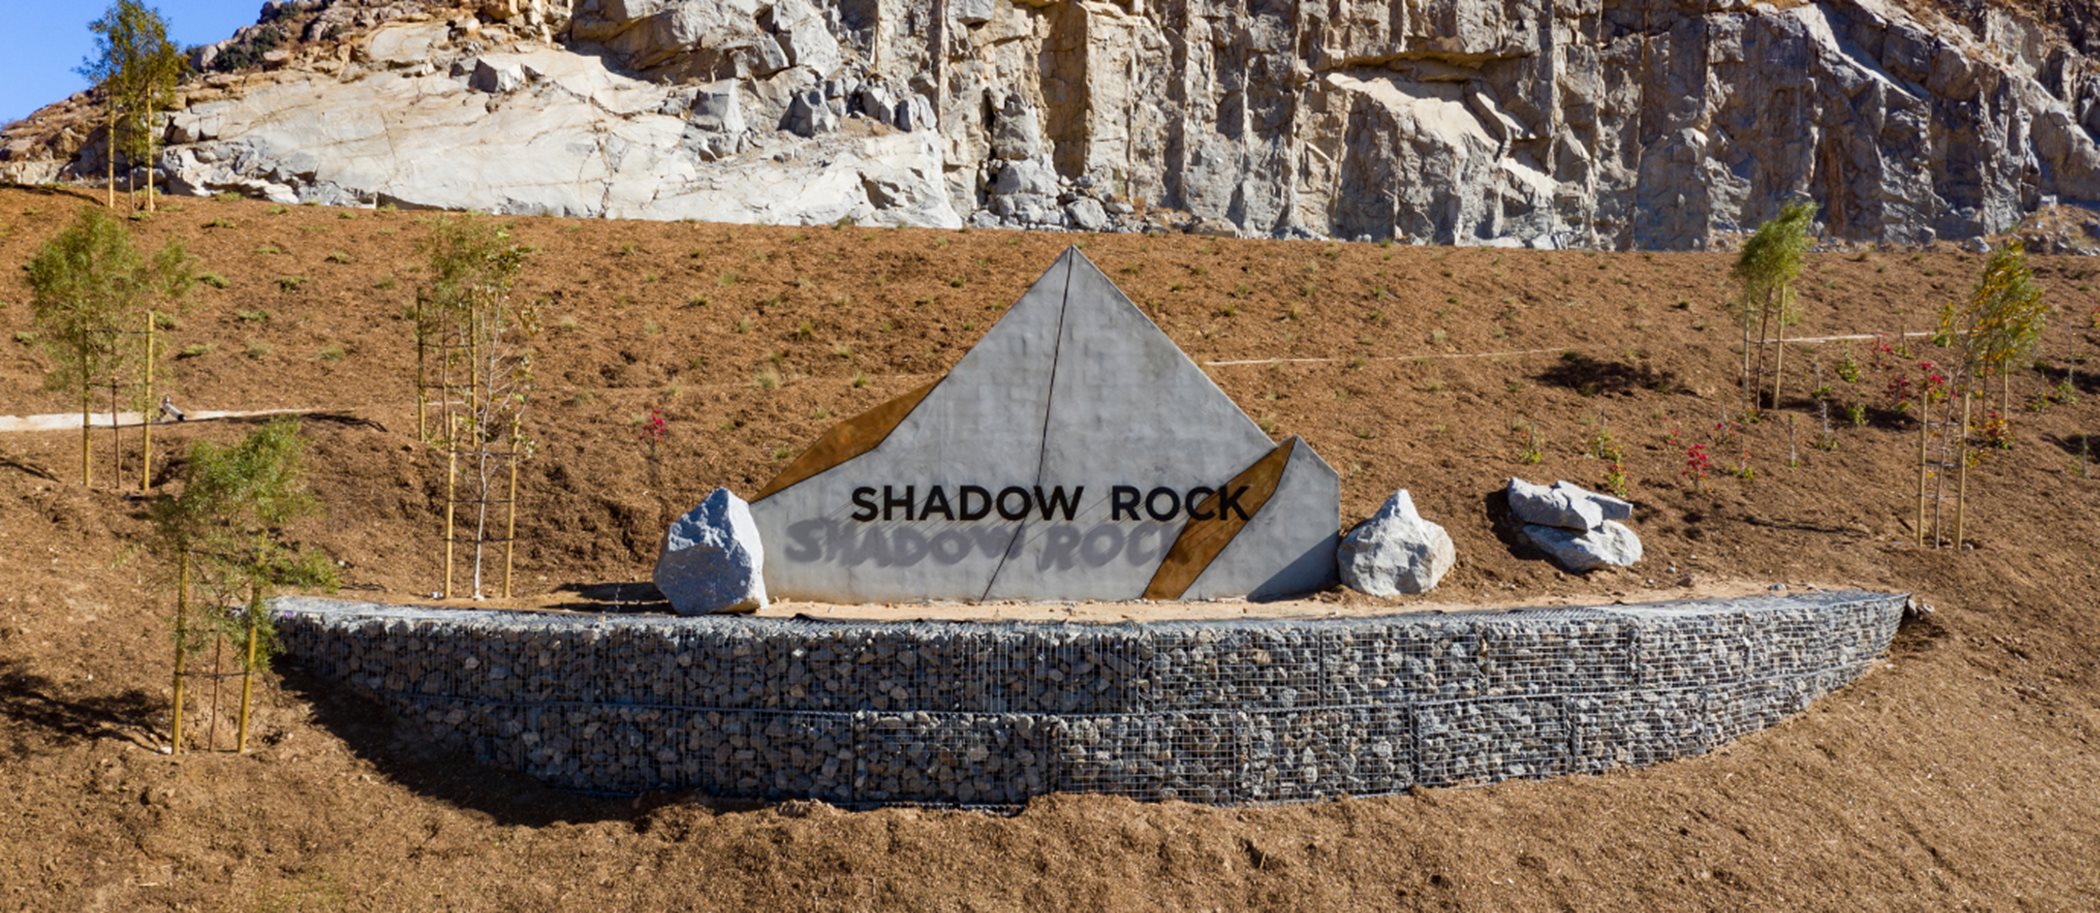 Shadow rock monument